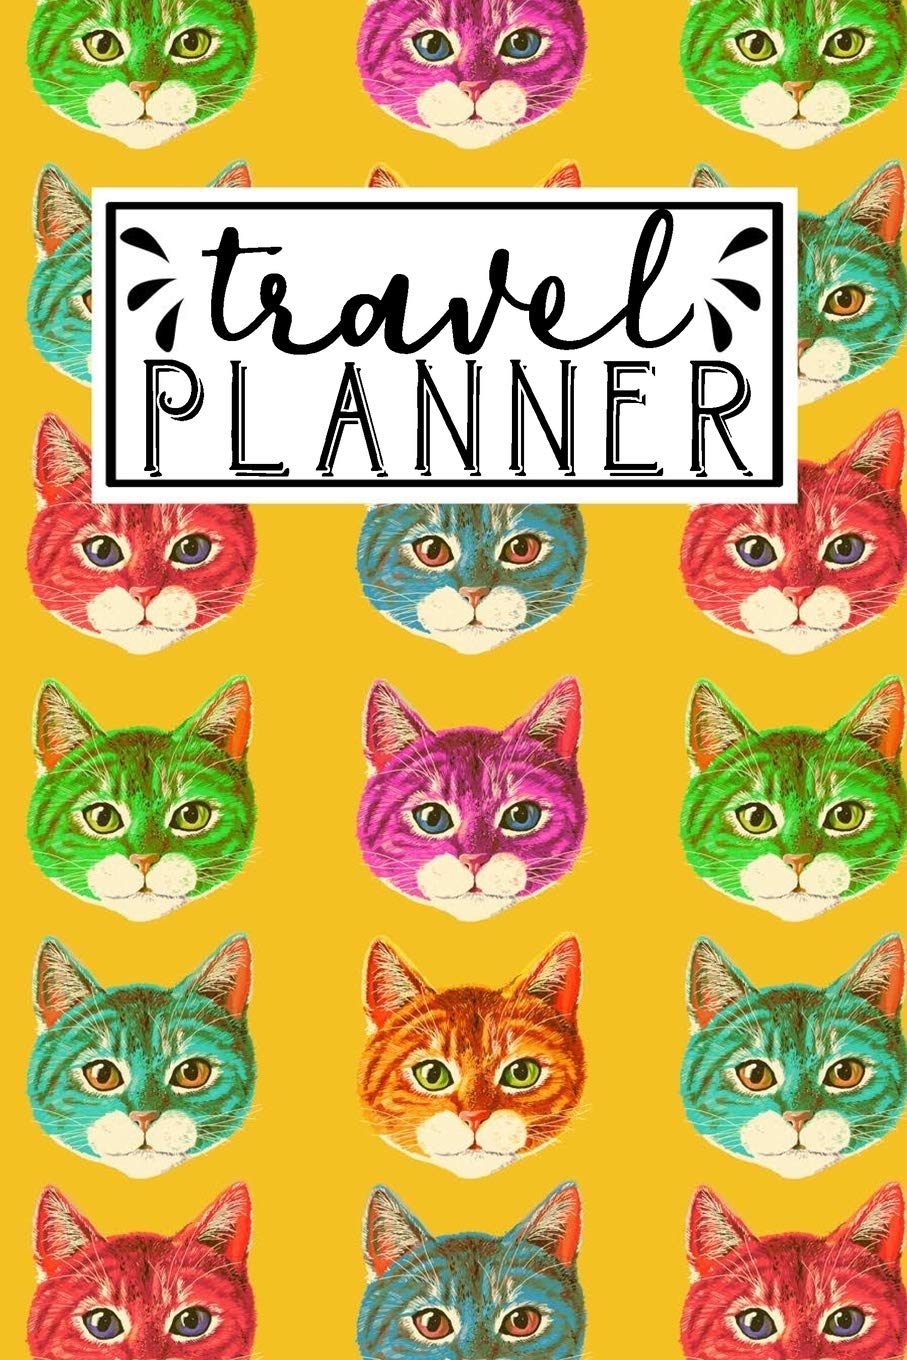 Travel Planner: Cute Colorful Animal Cat Pattern in Yellow Cover Gift